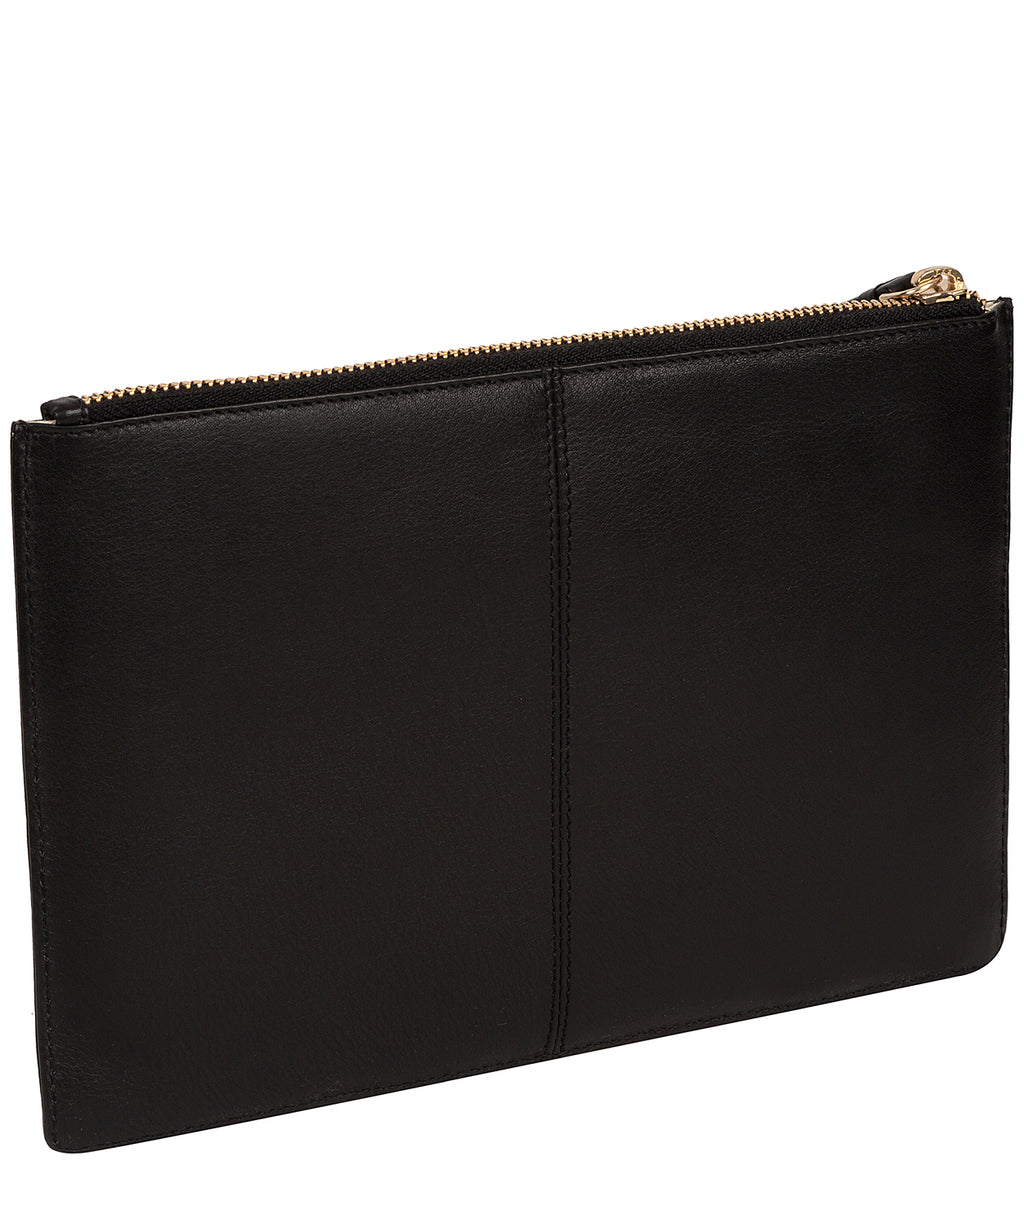 Black Leather Make-up Bag 'Osterly' by Pure Luxuries – Pure Luxuries London